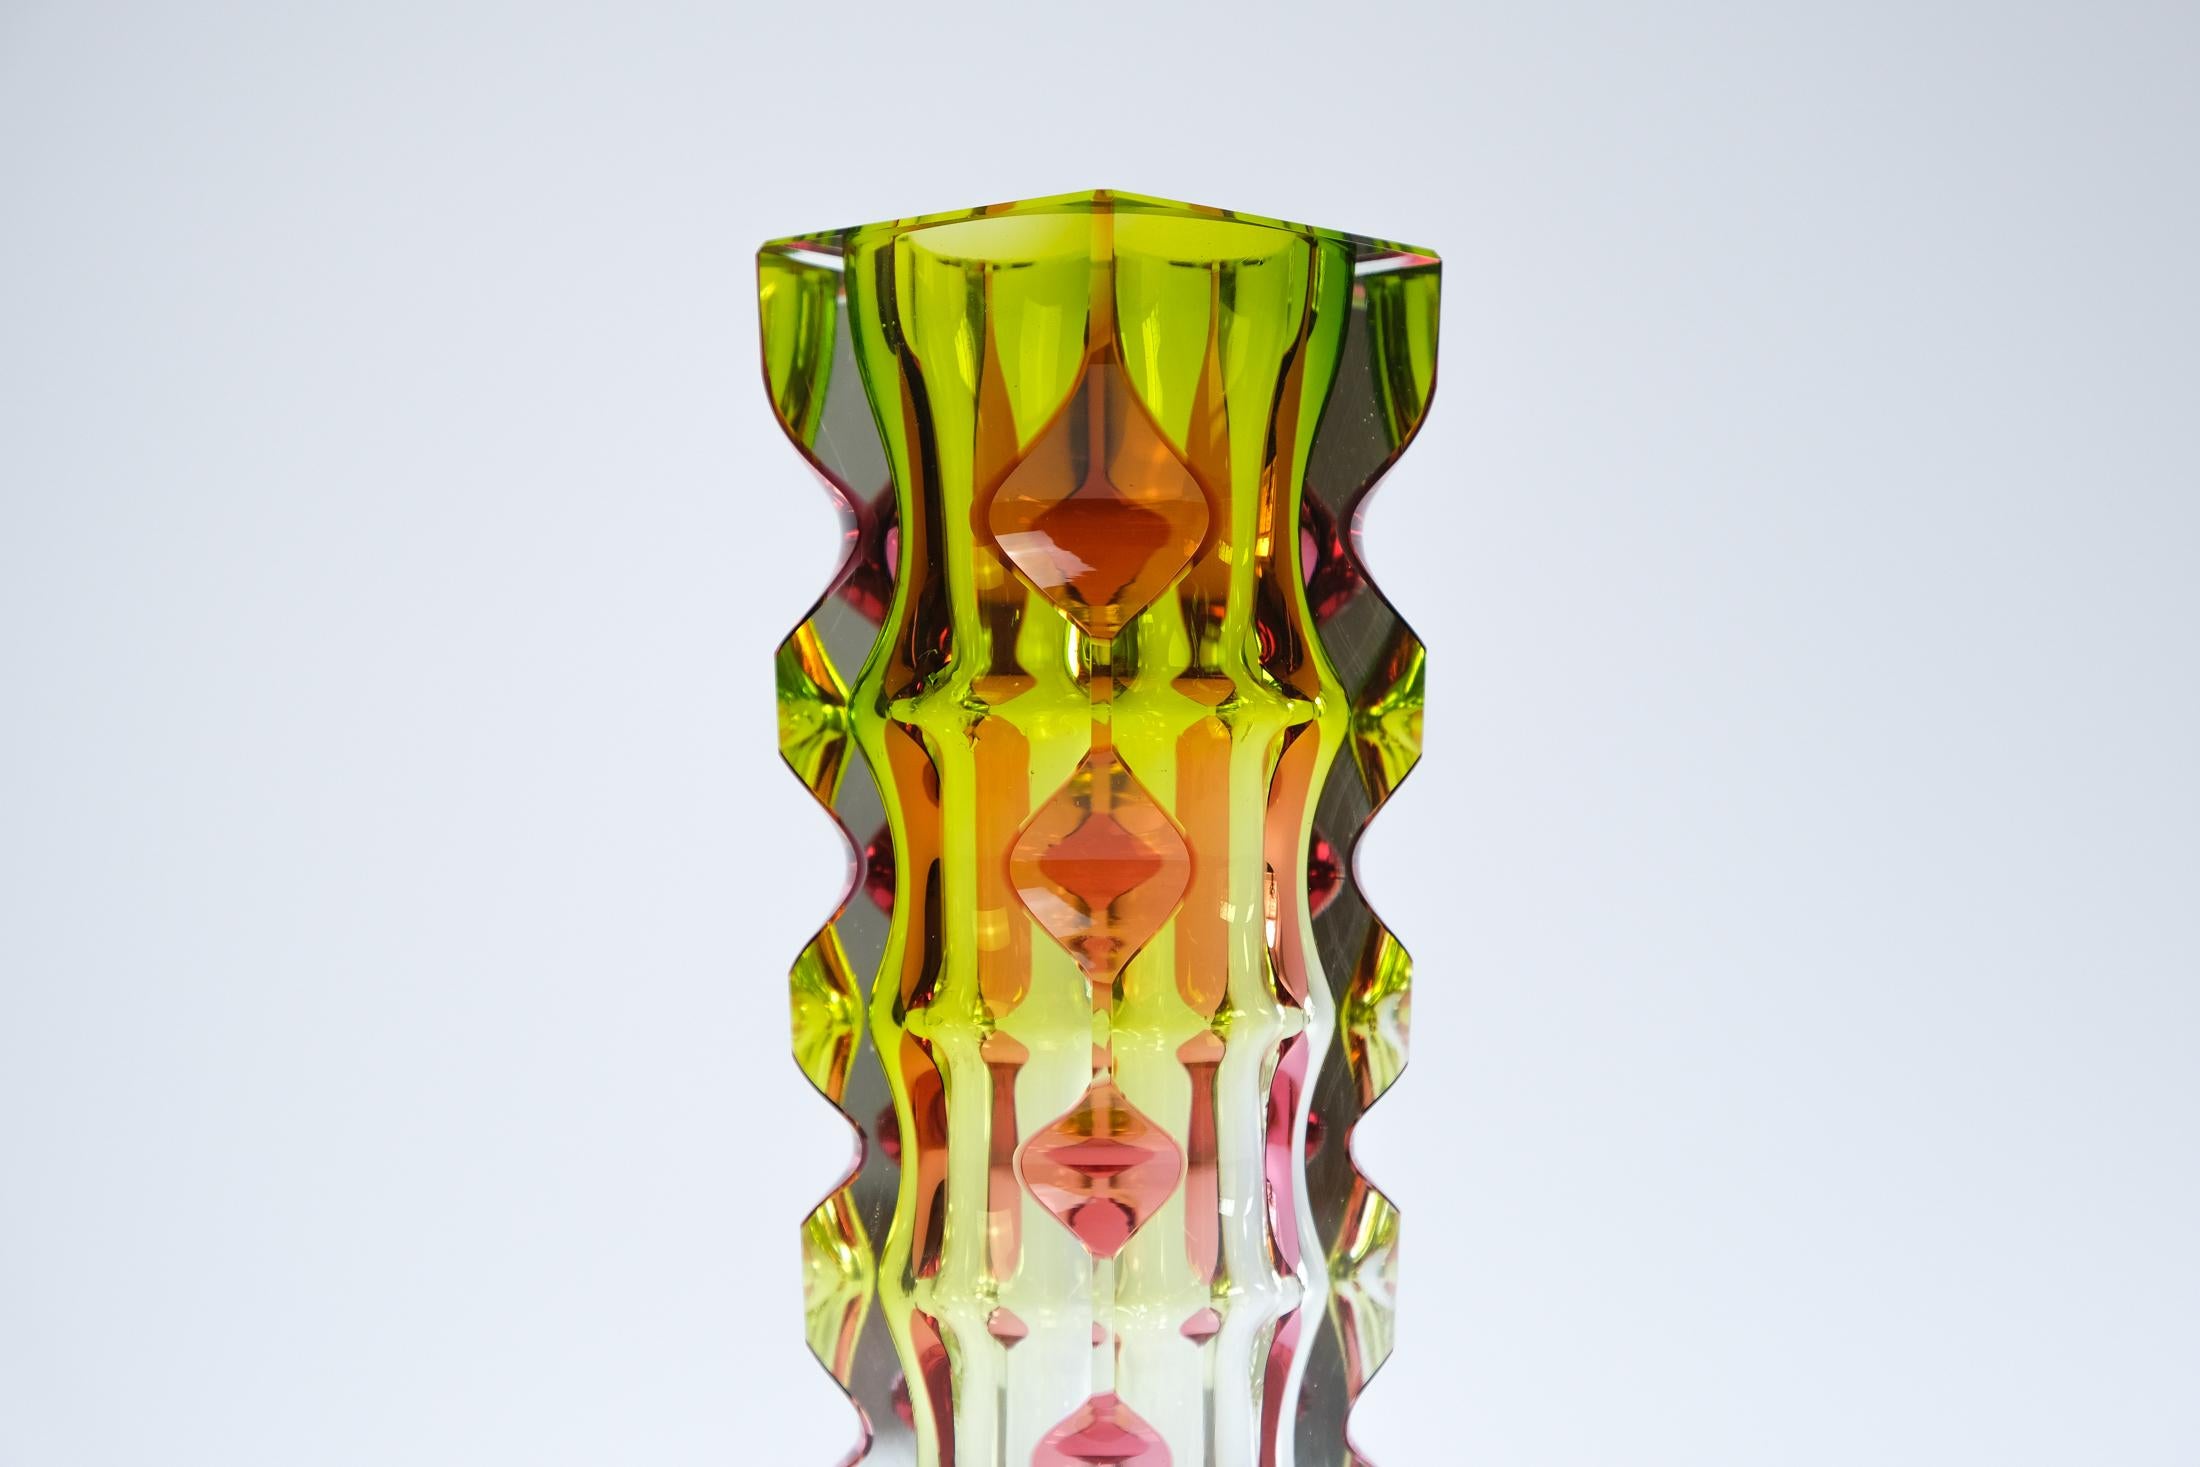 Oldrich Lipsky Cased & Cut Glass Vase For Novy Bor Exbor, Czechoslovakia c.1964 In Good Condition For Sale In London, GB